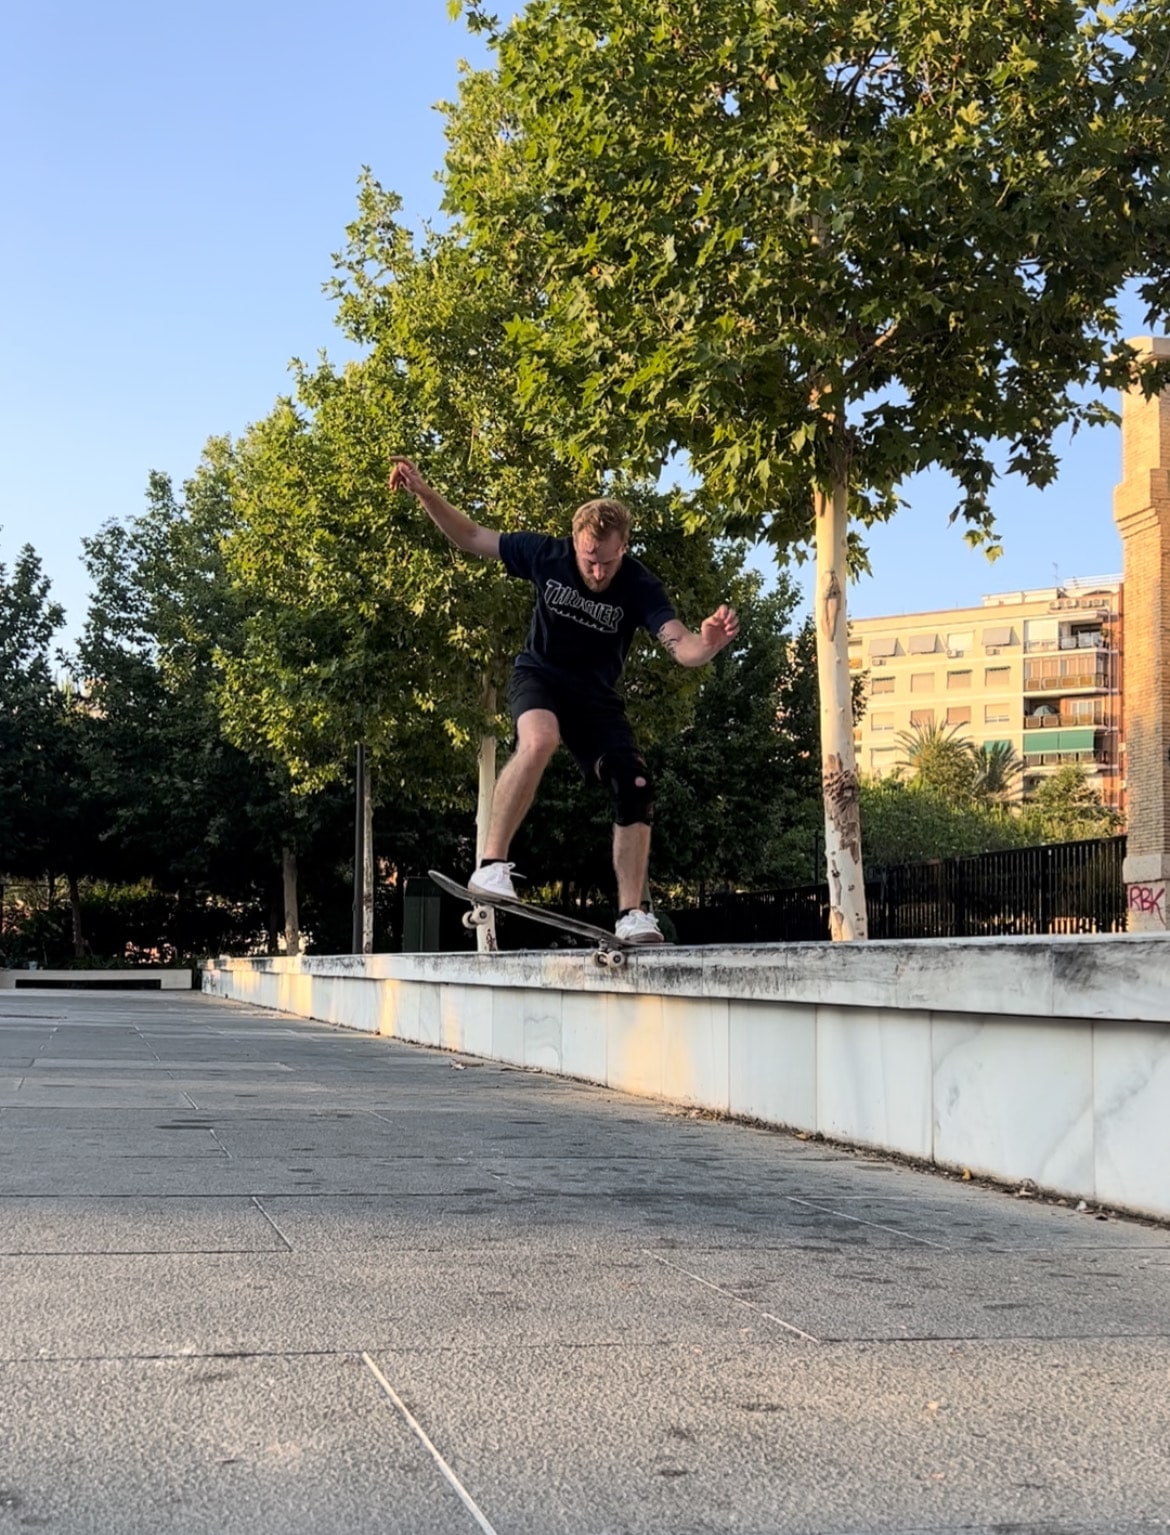 A skateboarder doing a noseslide on a ledge in Valencia, Spain.